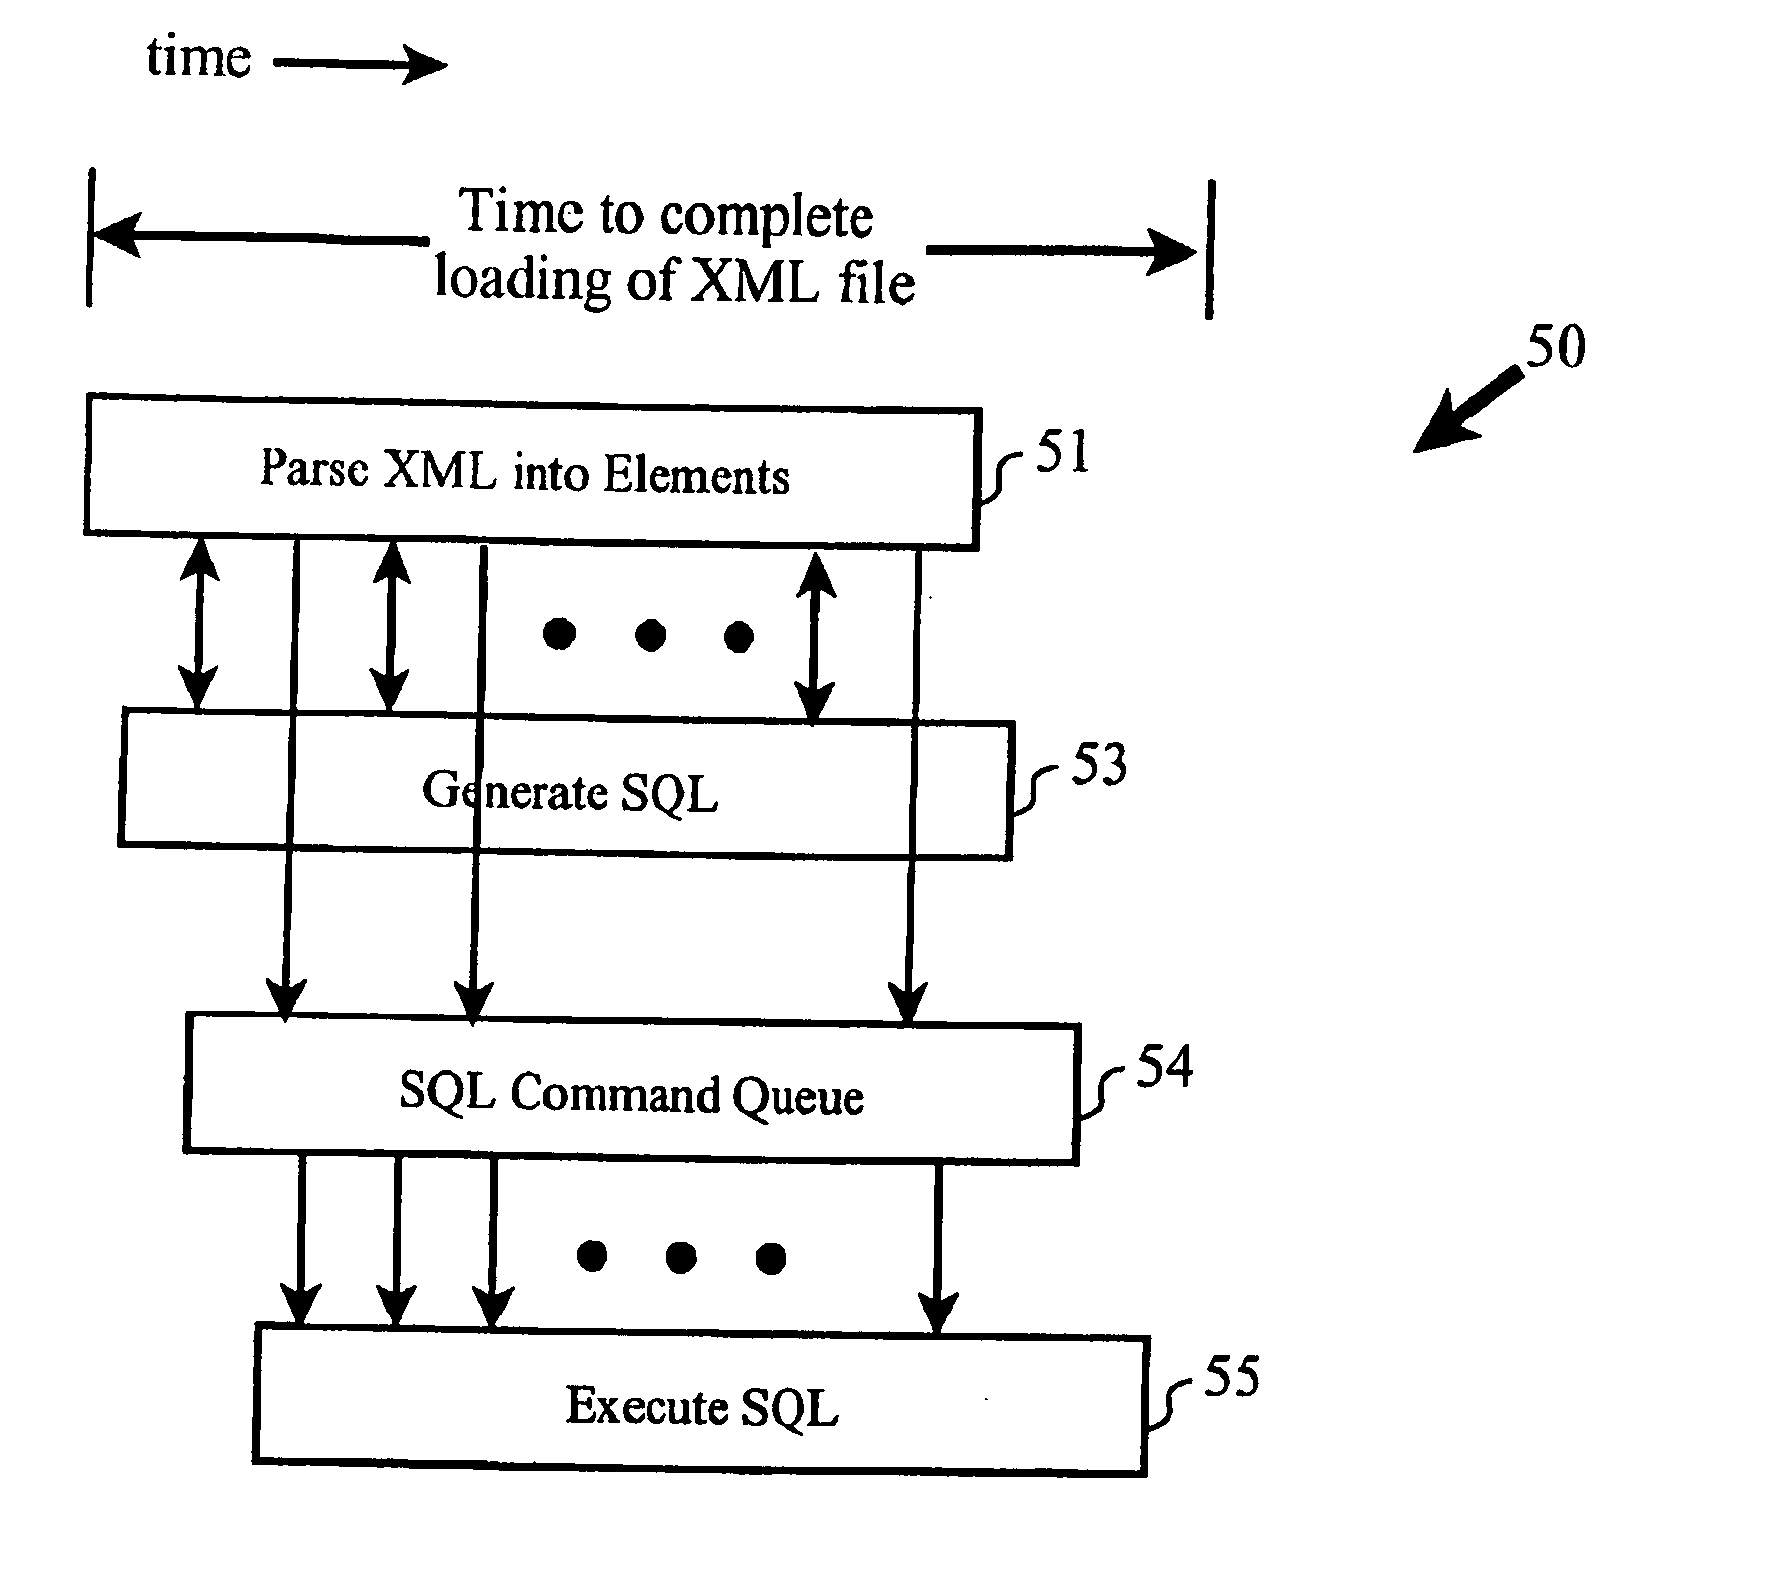 Method for scalable, fast normalization of XML documents for insertion of data into a relational database